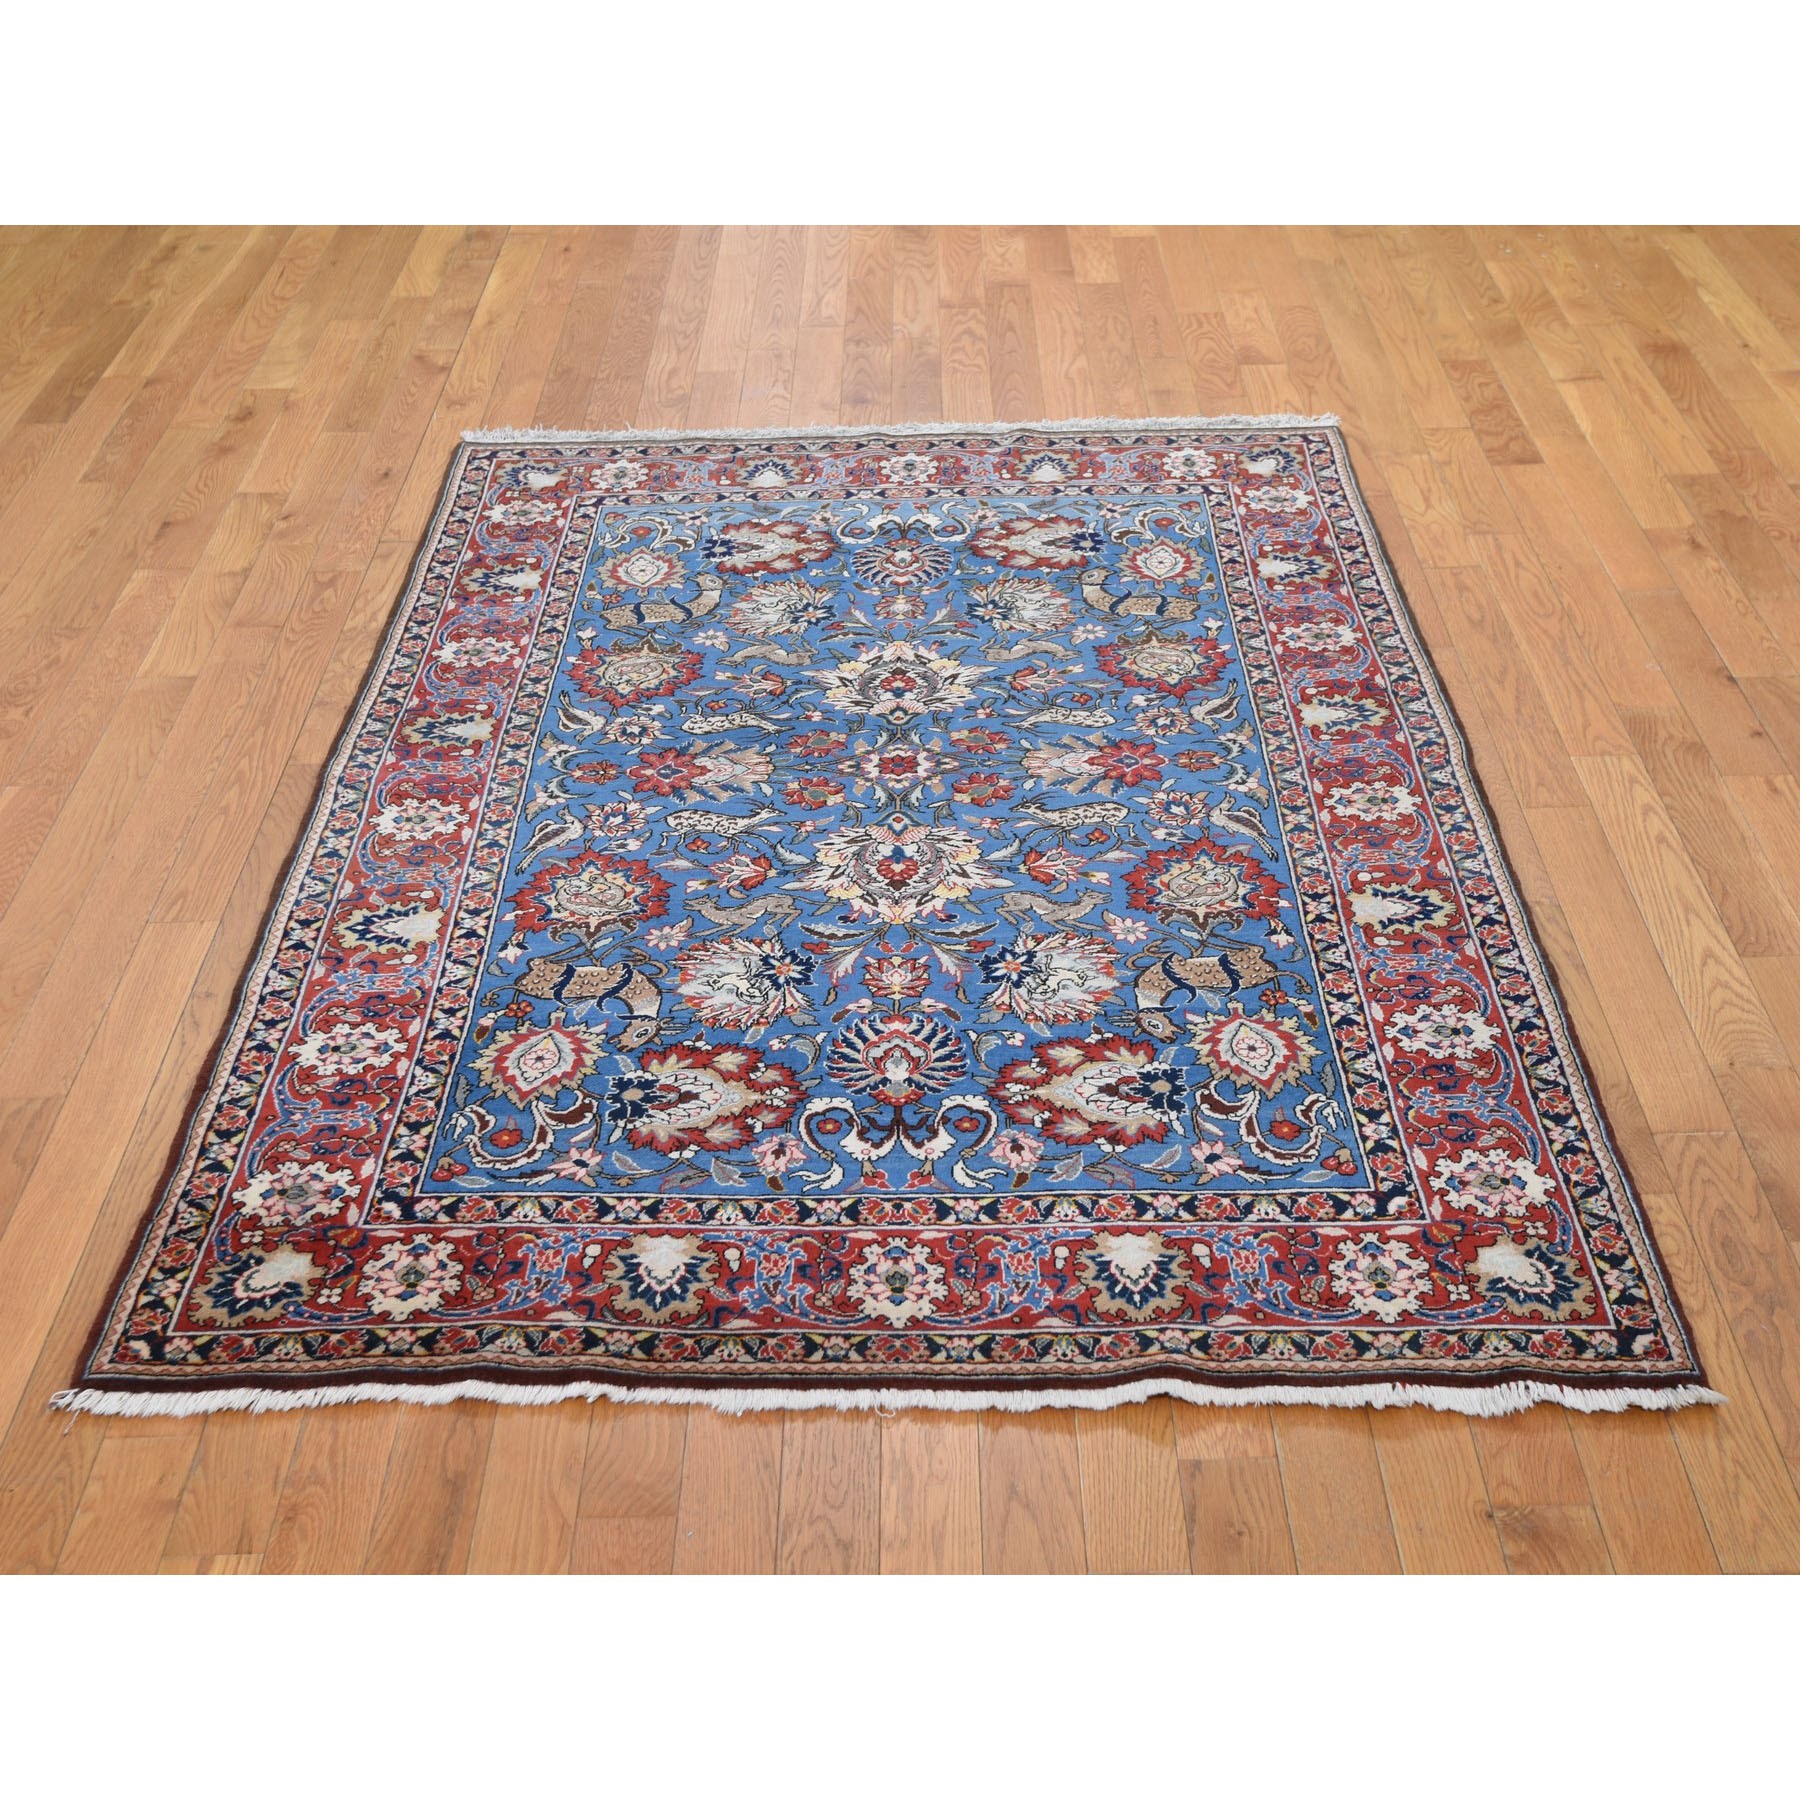 4-8 x7- Blue Vintage Persian Qum Full Pile Exc Condition Hand Knotted Oriental Rug 